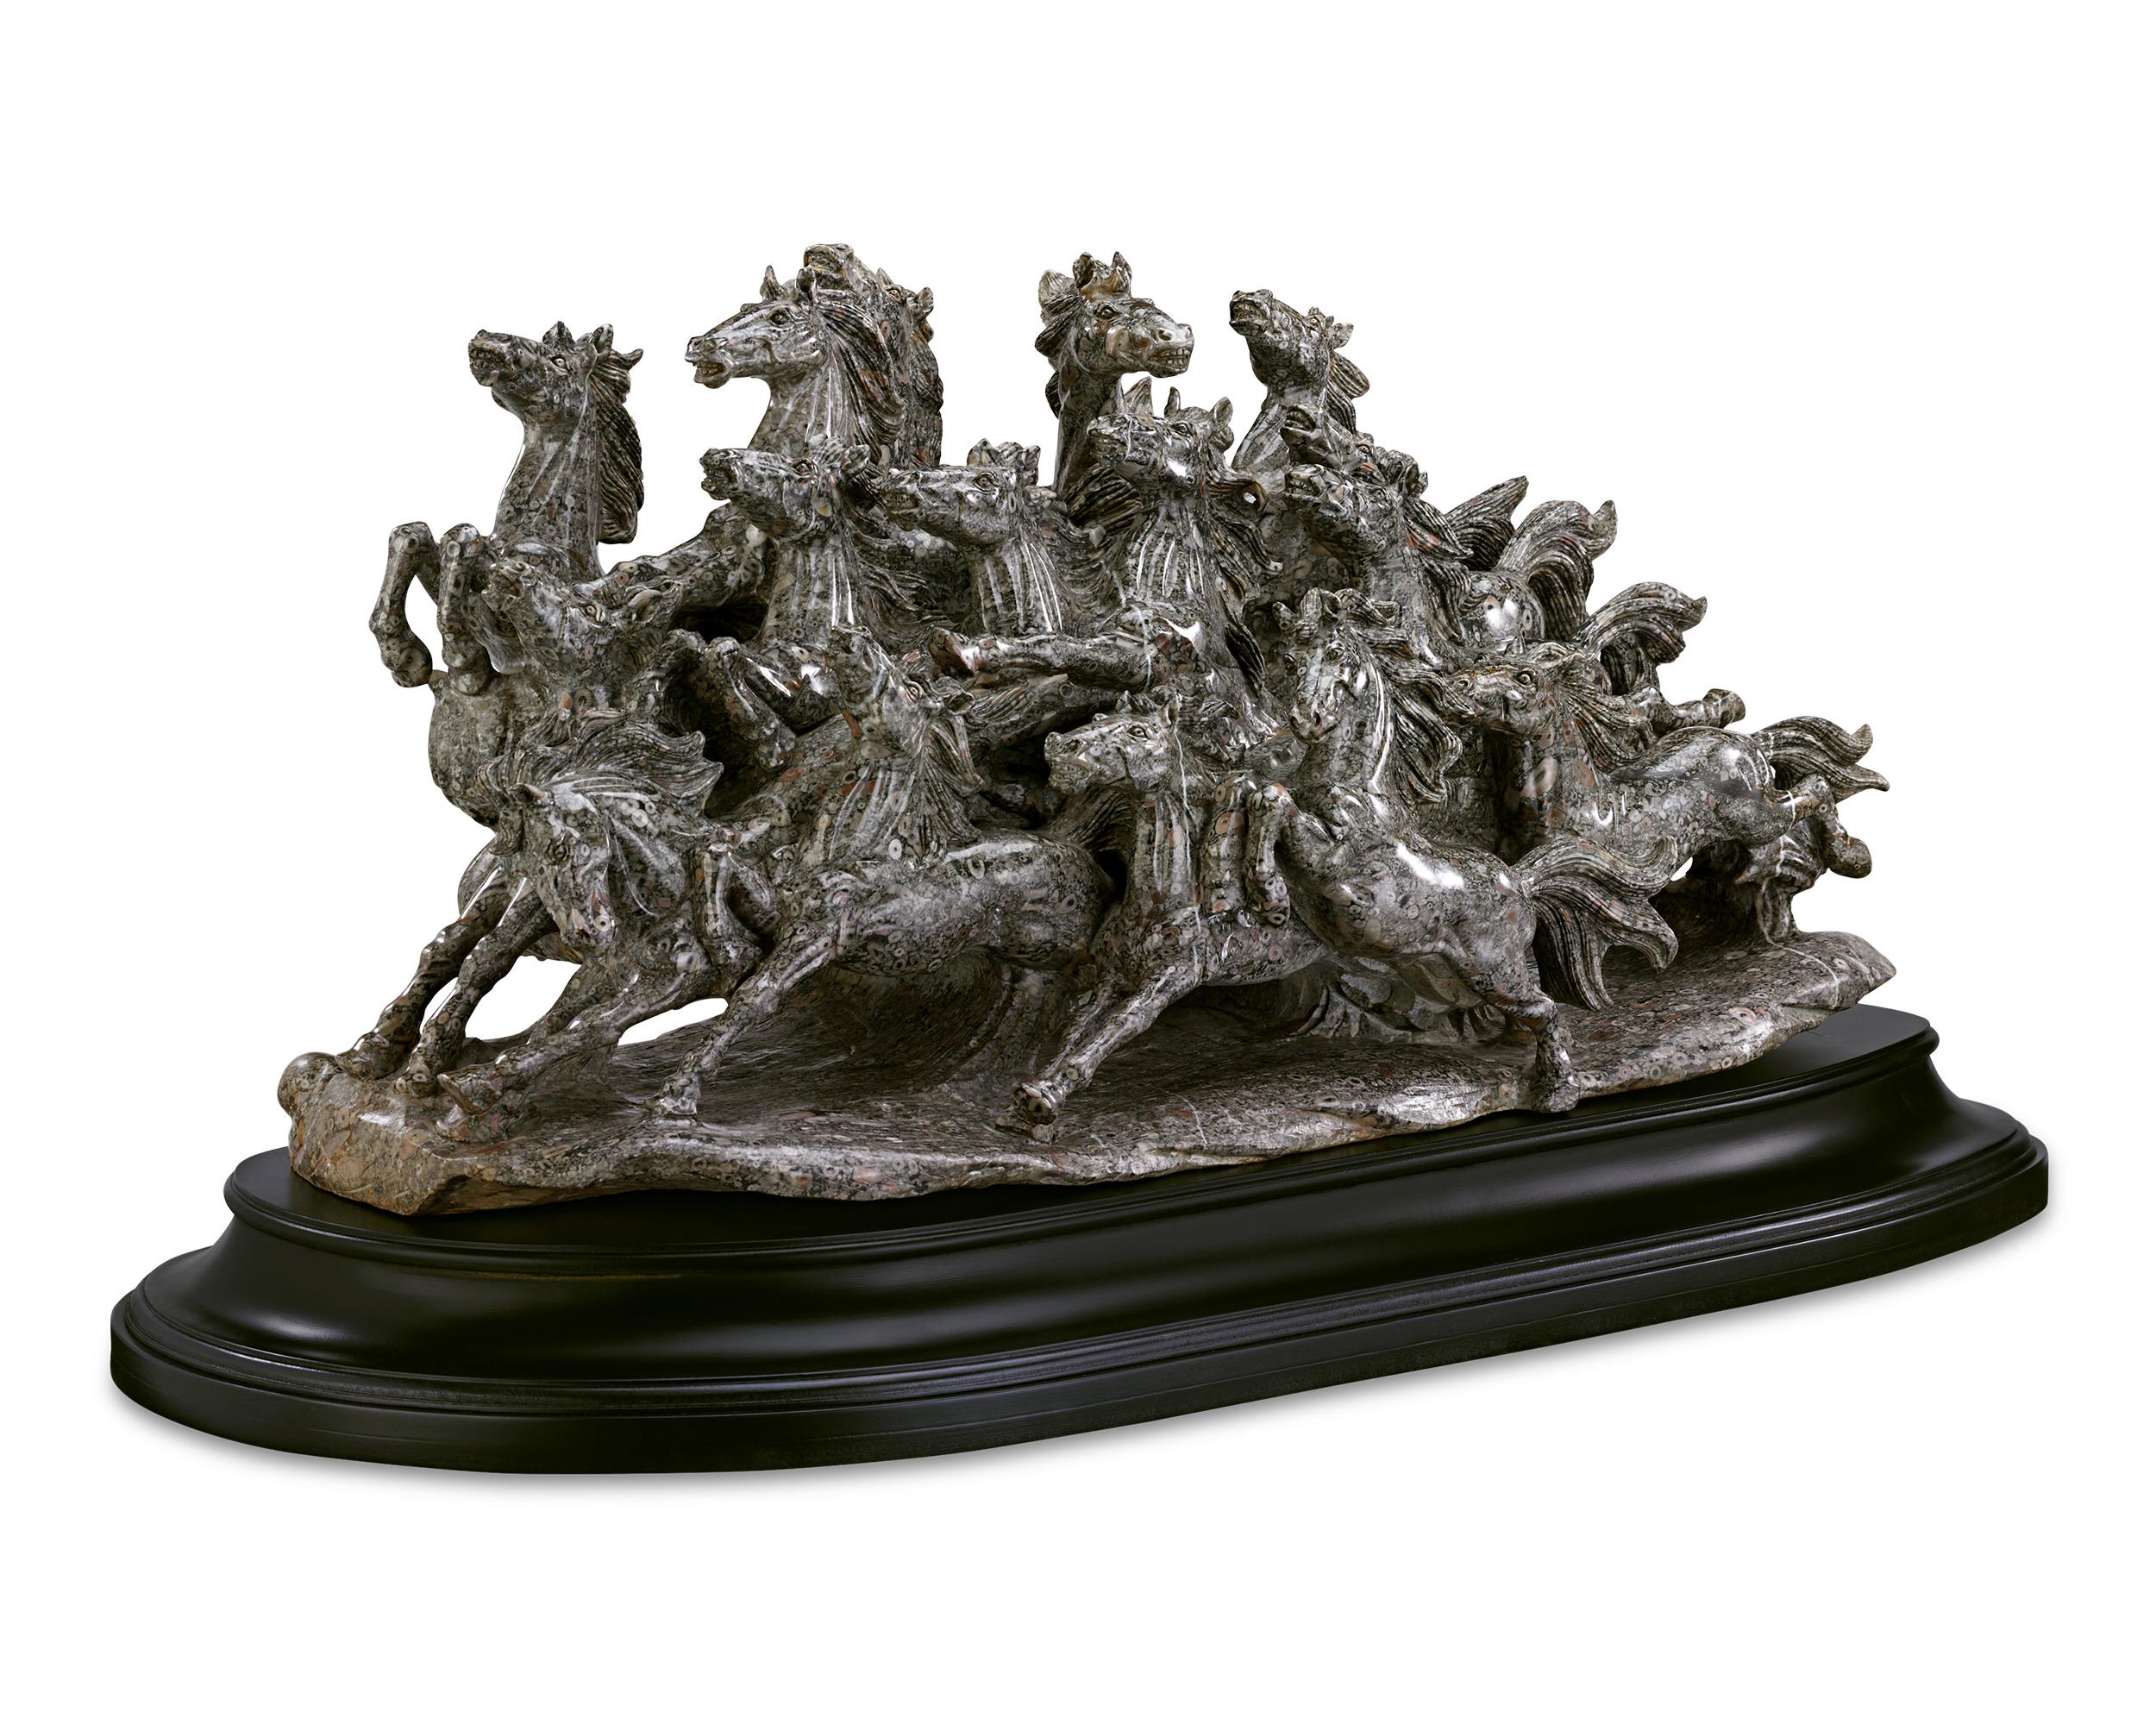 This impressive and unique sculpture transforms a highly rare fossiliferous crinoid marble specimen into a stunning sculpted herd of wild horses. Crafted in the 20th century, the remarkable work features a cacophony of equine animals teeming with